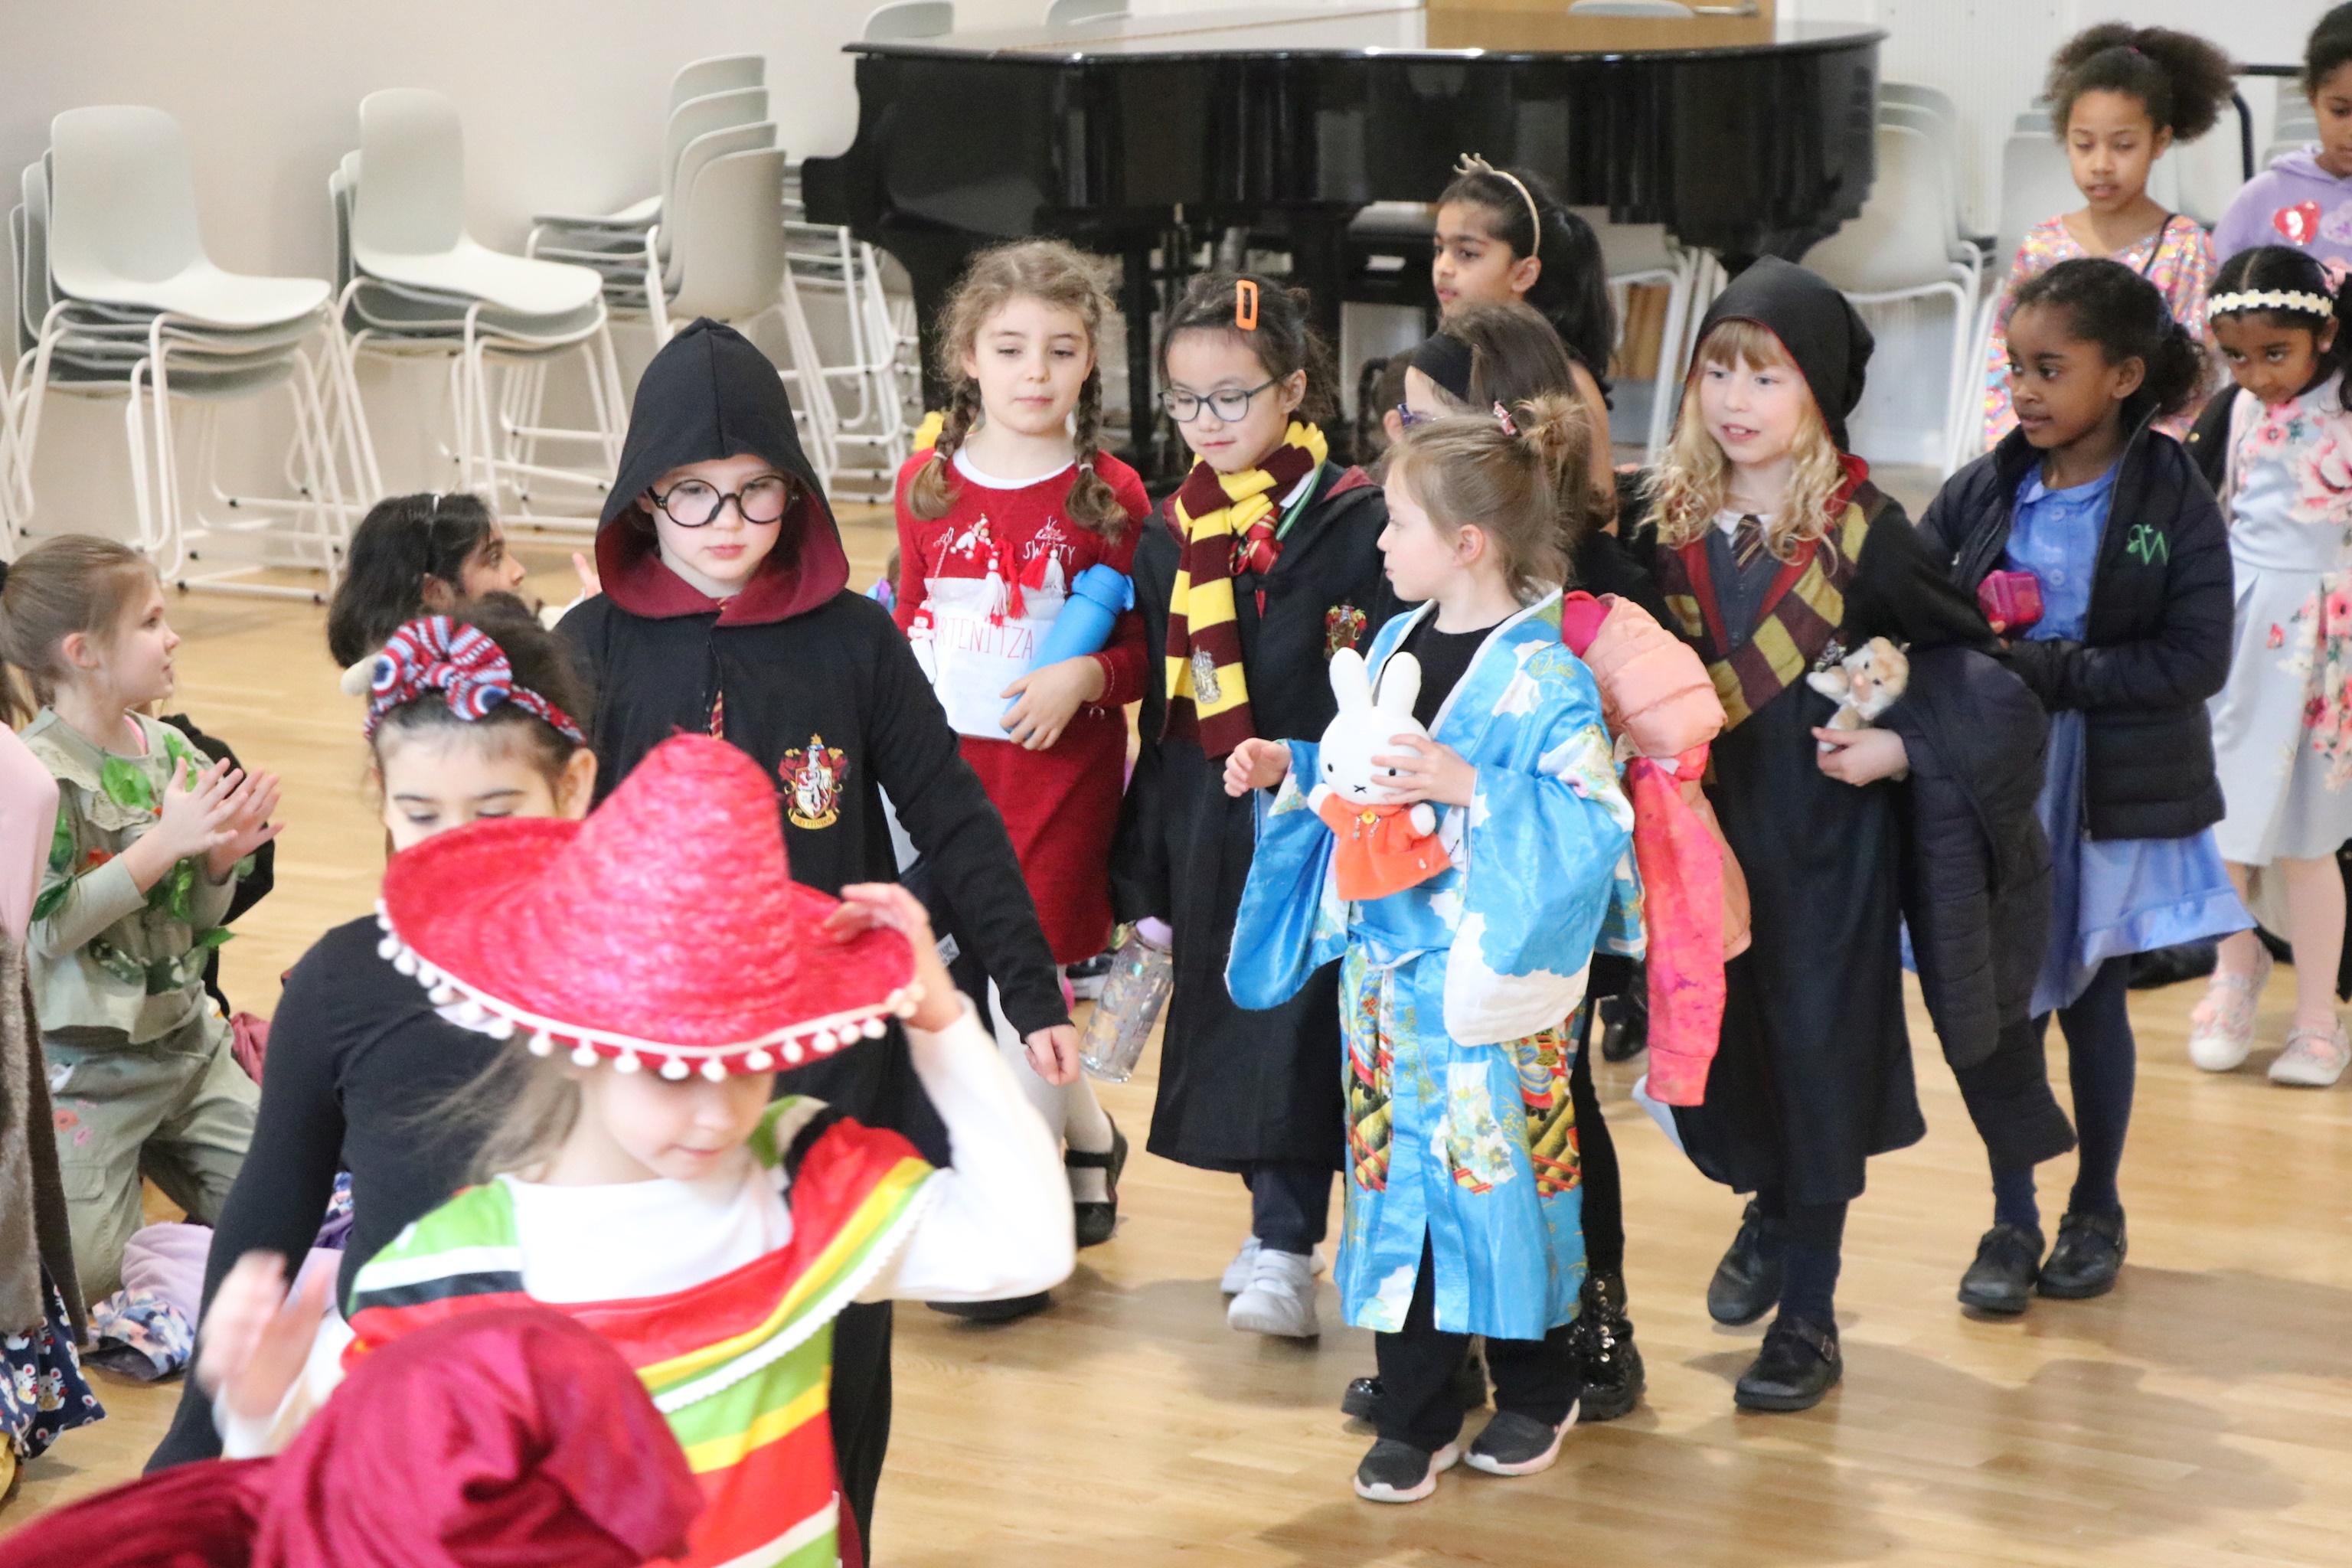 A photograph of lower junior school girls walking. They are all wearing different costumes for World Book Day